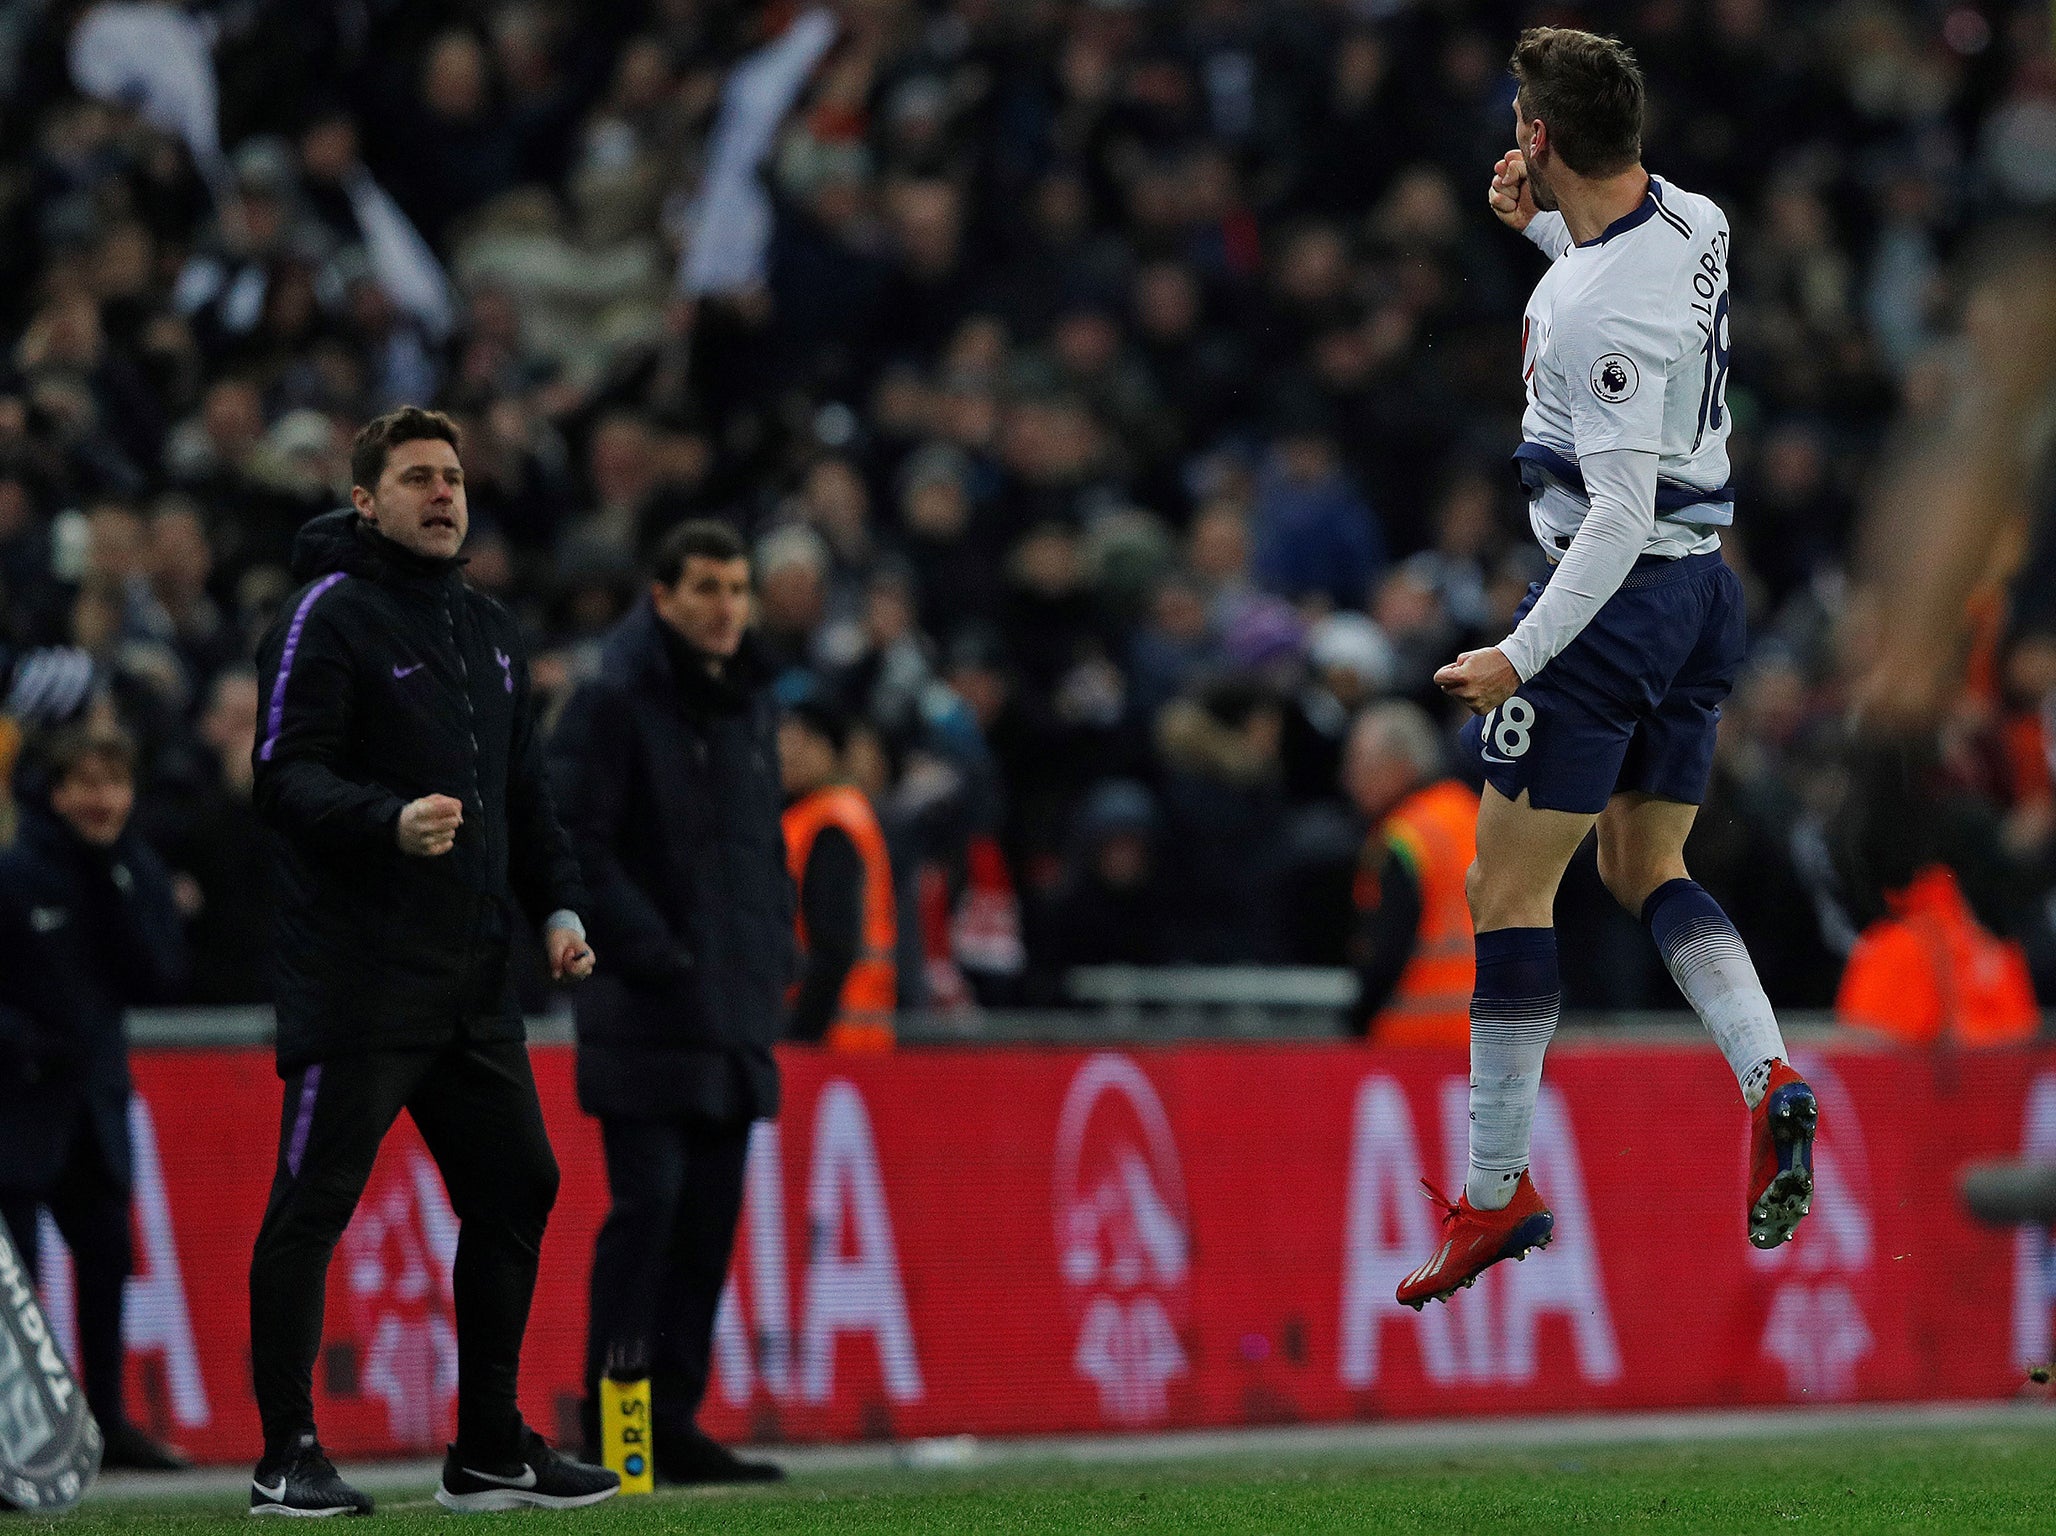 Fernando Llorente runs to celebrate with his manager